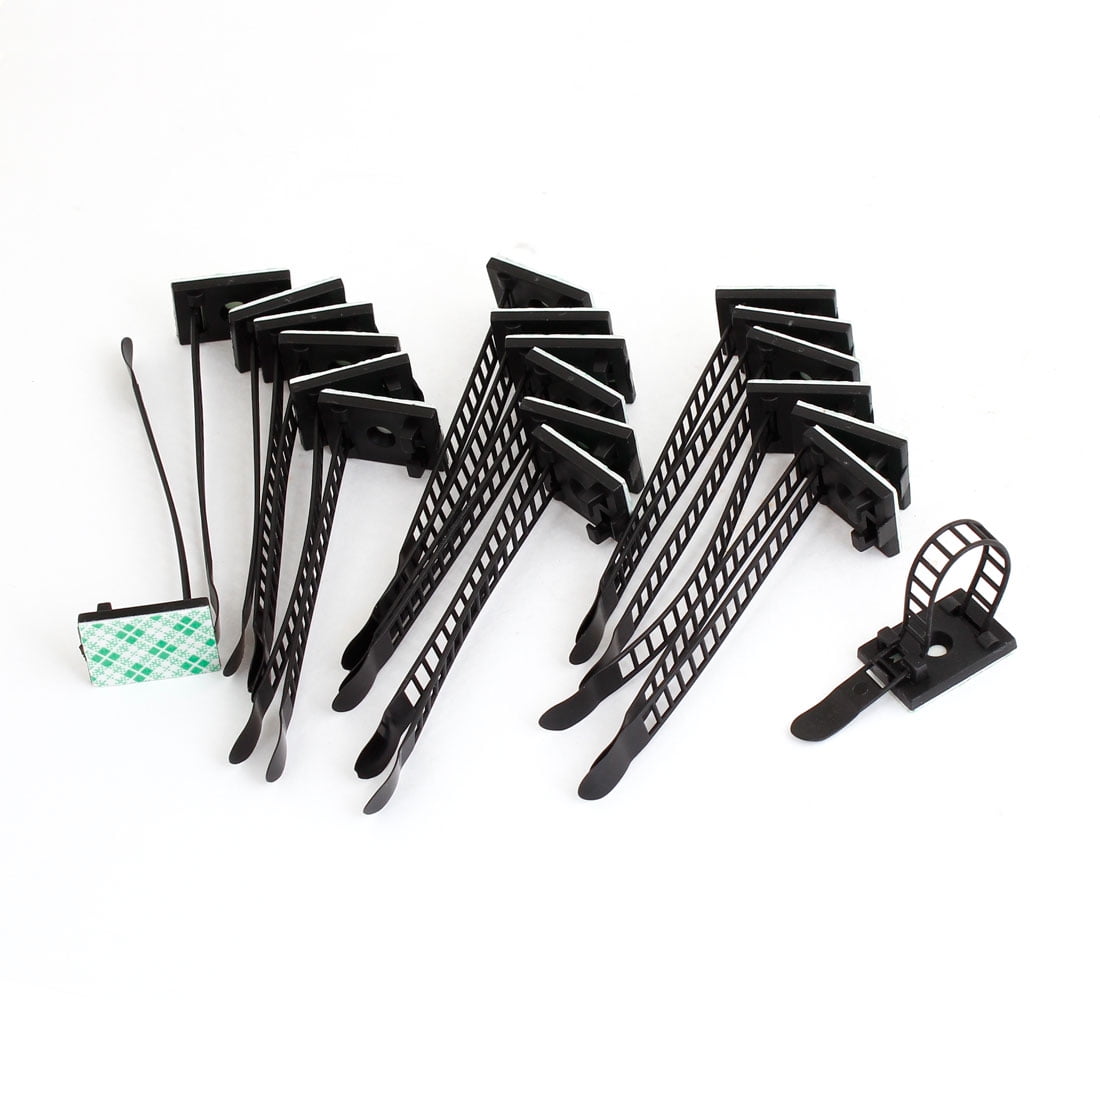 100Pcs Plastic Fixed Position Based Self-adhesive Cable Tie Wire Holder 20*20mm 